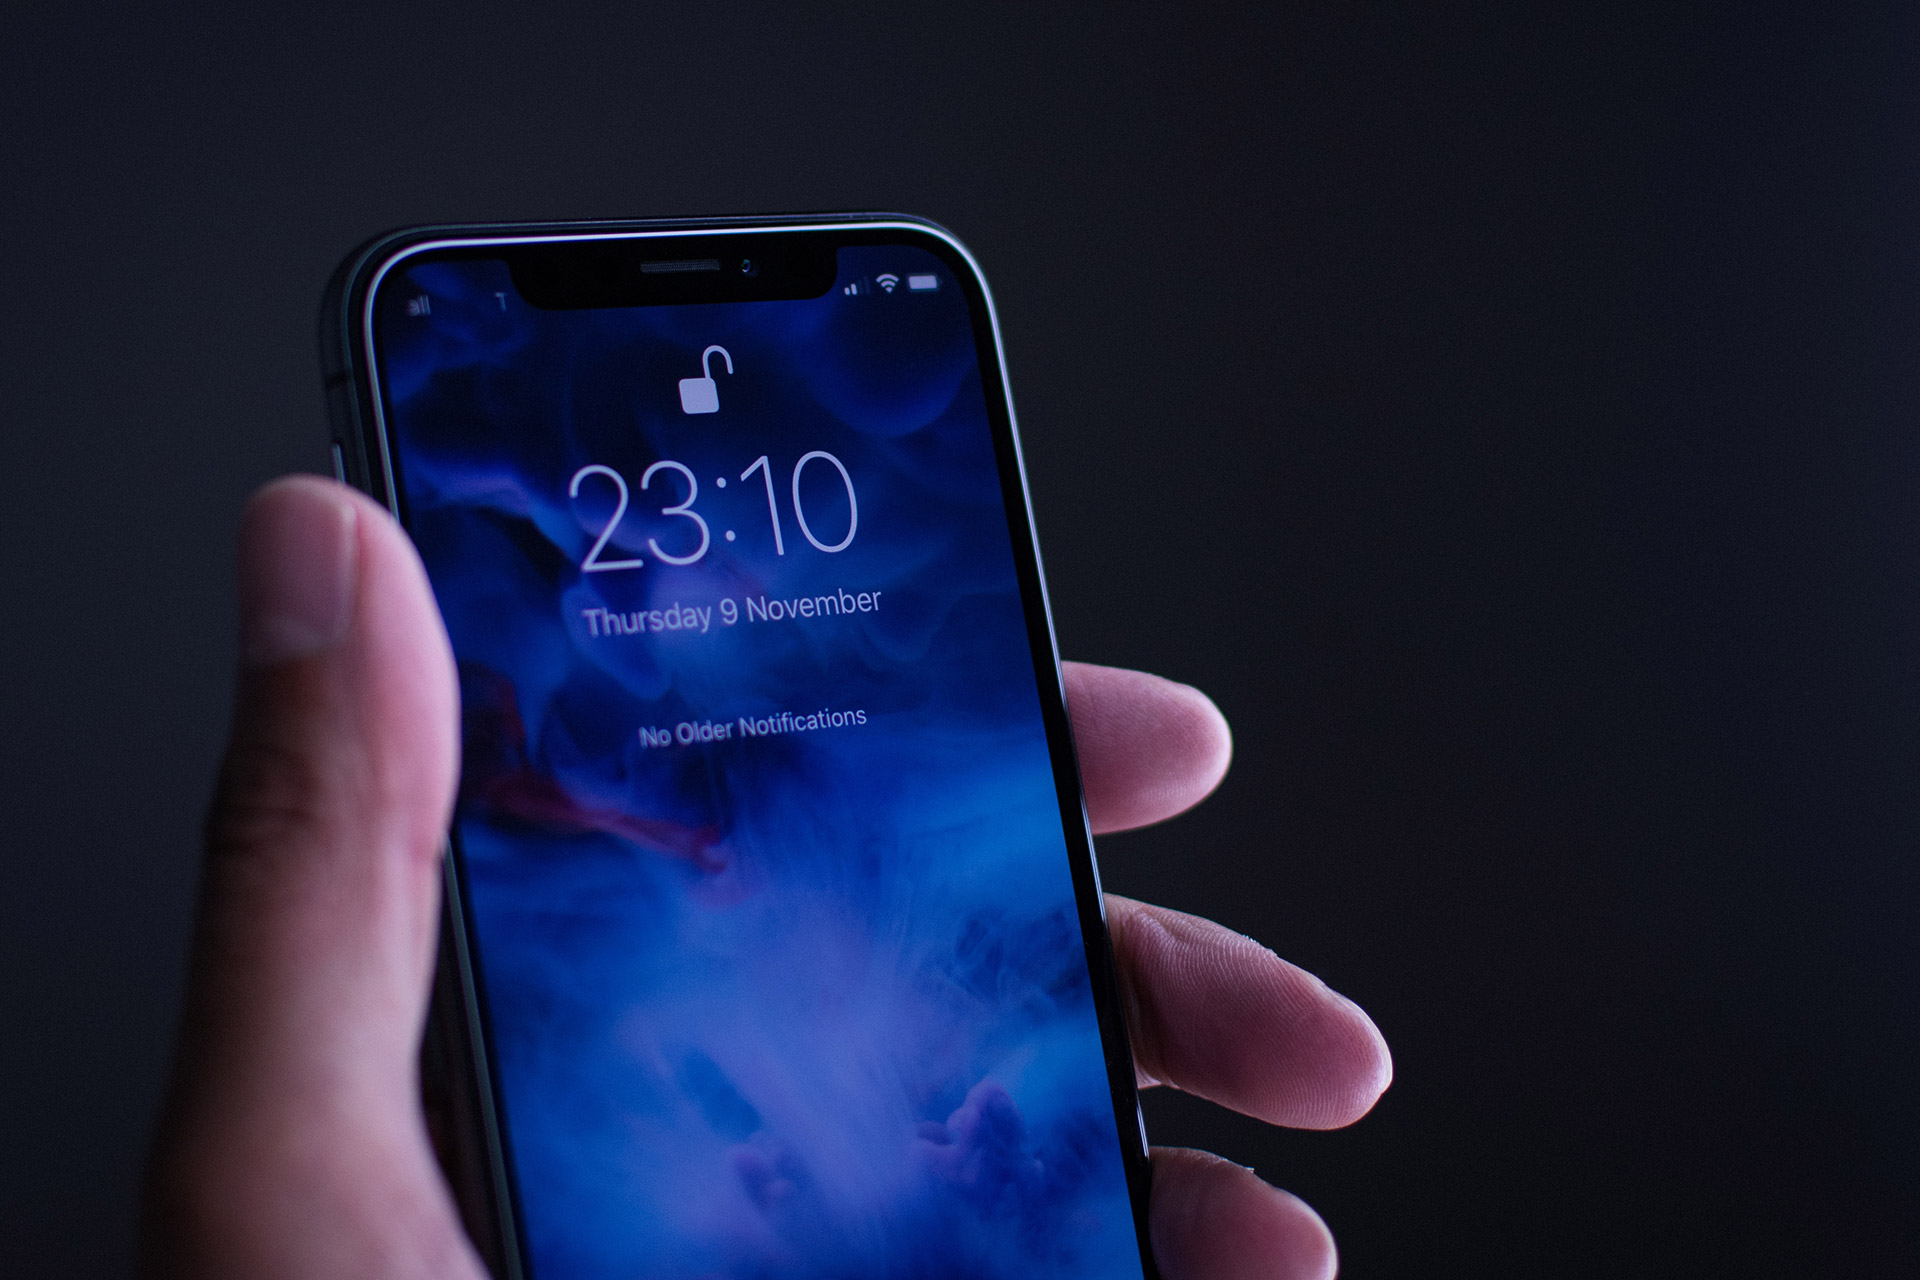 iOS 12 Tips & Tricks: How to add a second person to Face ID on iPhone